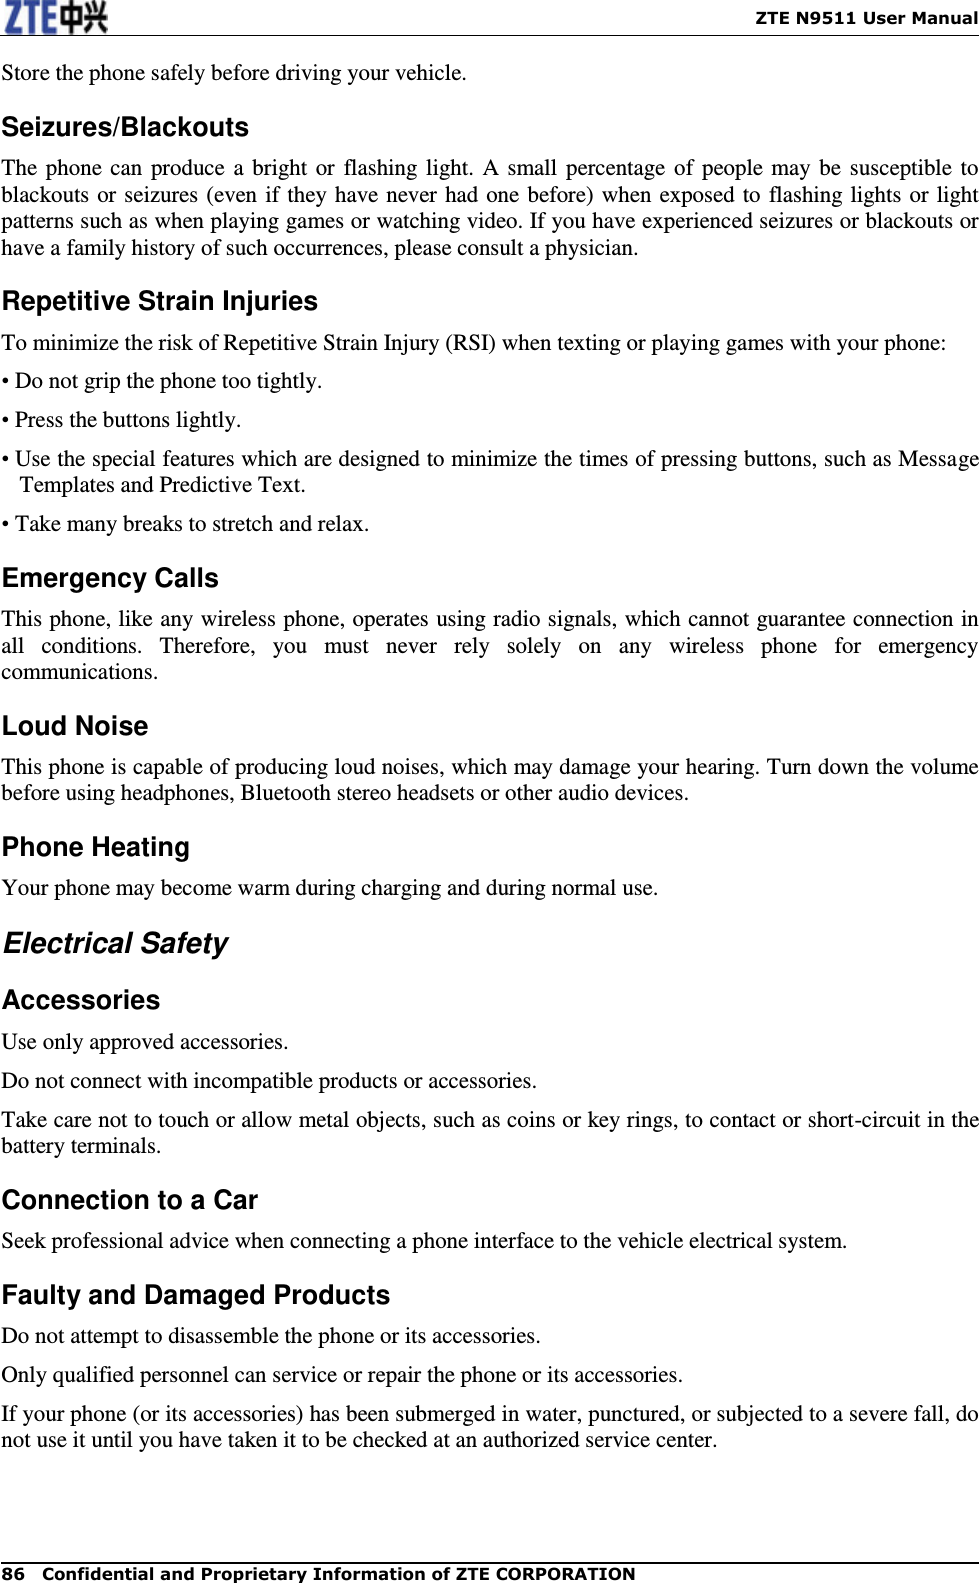    ZTE N9511 User Manual 86  Confidential and Proprietary Information of ZTE CORPORATION Store the phone safely before driving your vehicle. Seizures/Blackouts The phone  can  produce a bright or flashing light. A small  percentage of  people may be  susceptible to blackouts or seizures (even if they have never had one before) when exposed to flashing lights or light patterns such as when playing games or watching video. If you have experienced seizures or blackouts or have a family history of such occurrences, please consult a physician. Repetitive Strain Injuries To minimize the risk of Repetitive Strain Injury (RSI) when texting or playing games with your phone: • Do not grip the phone too tightly. • Press the buttons lightly. • Use the special features which are designed to minimize the times of pressing buttons, such as Message Templates and Predictive Text. • Take many breaks to stretch and relax. Emergency Calls This phone, like any wireless phone, operates using radio signals, which cannot guarantee connection in all  conditions.  Therefore,  you  must  never  rely  solely  on  any  wireless  phone  for  emergency communications. Loud Noise This phone is capable of producing loud noises, which may damage your hearing. Turn down the volume before using headphones, Bluetooth stereo headsets or other audio devices. Phone Heating Your phone may become warm during charging and during normal use. Electrical Safety Accessories Use only approved accessories. Do not connect with incompatible products or accessories. Take care not to touch or allow metal objects, such as coins or key rings, to contact or short-circuit in the battery terminals. Connection to a Car Seek professional advice when connecting a phone interface to the vehicle electrical system. Faulty and Damaged Products Do not attempt to disassemble the phone or its accessories. Only qualified personnel can service or repair the phone or its accessories. If your phone (or its accessories) has been submerged in water, punctured, or subjected to a severe fall, do not use it until you have taken it to be checked at an authorized service center. 